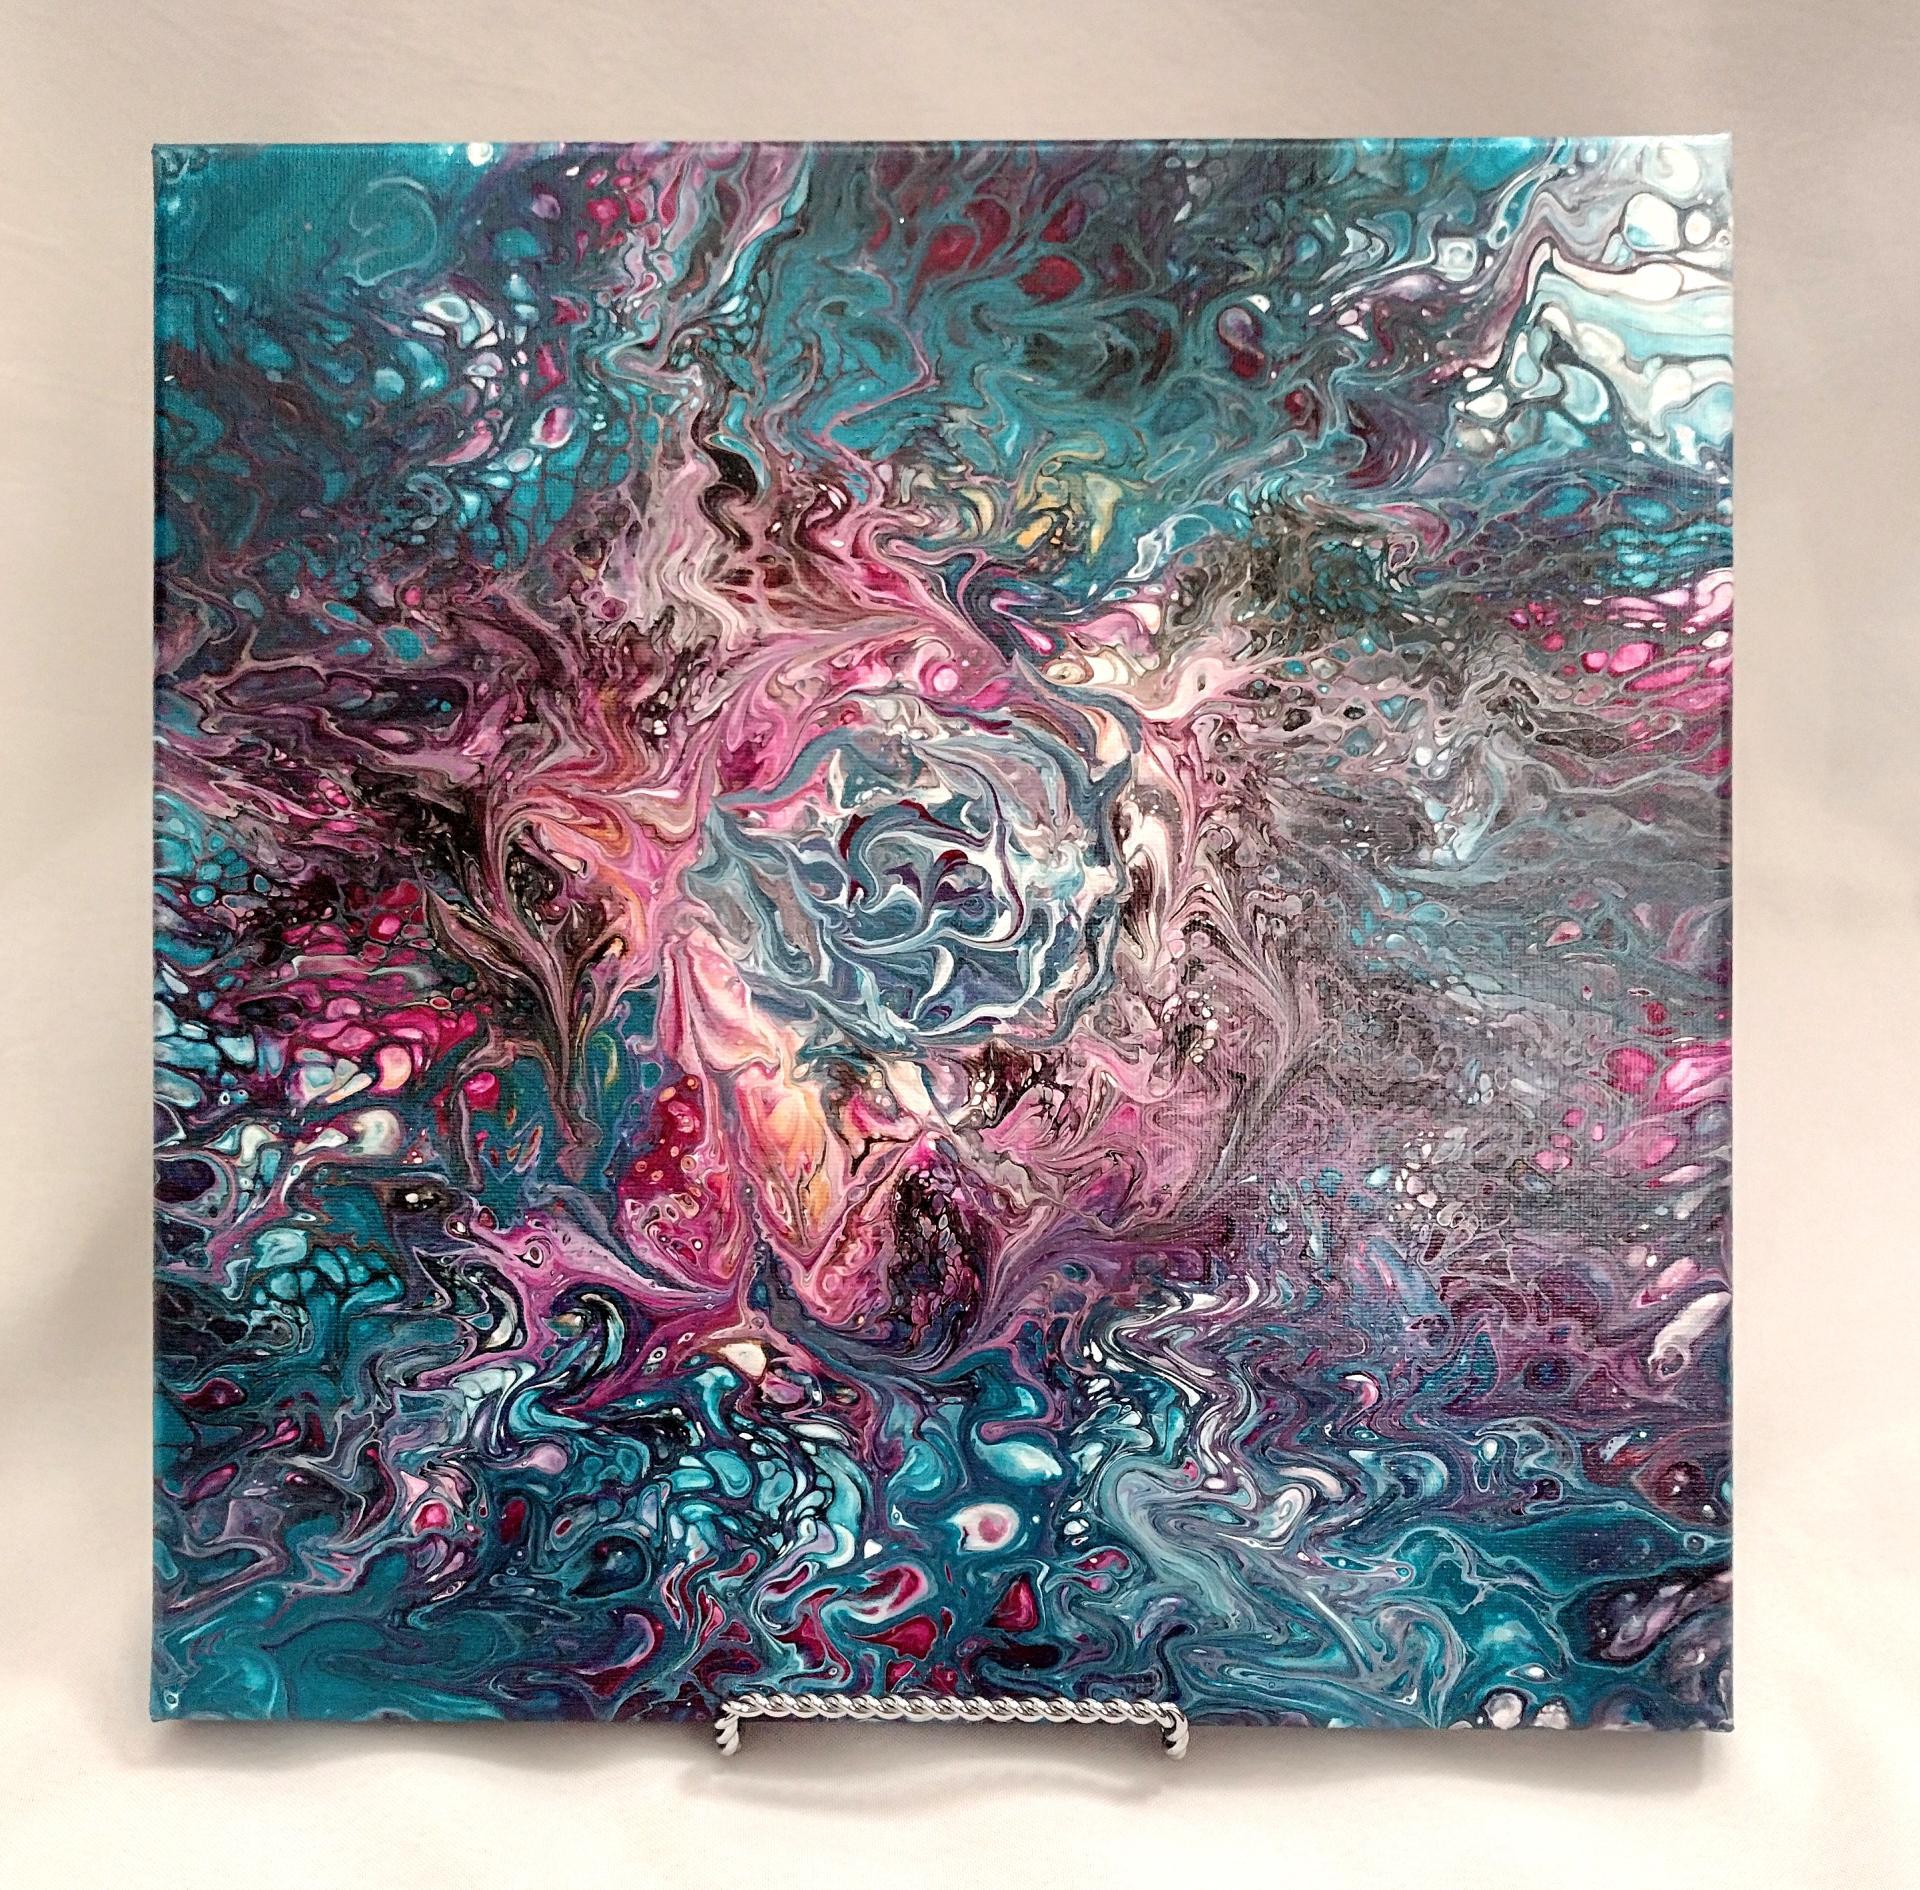 Turquoise and Pink Swirls Abstract Original Acrylic Pour Painting, 12" x 12", Fluid Art Painting